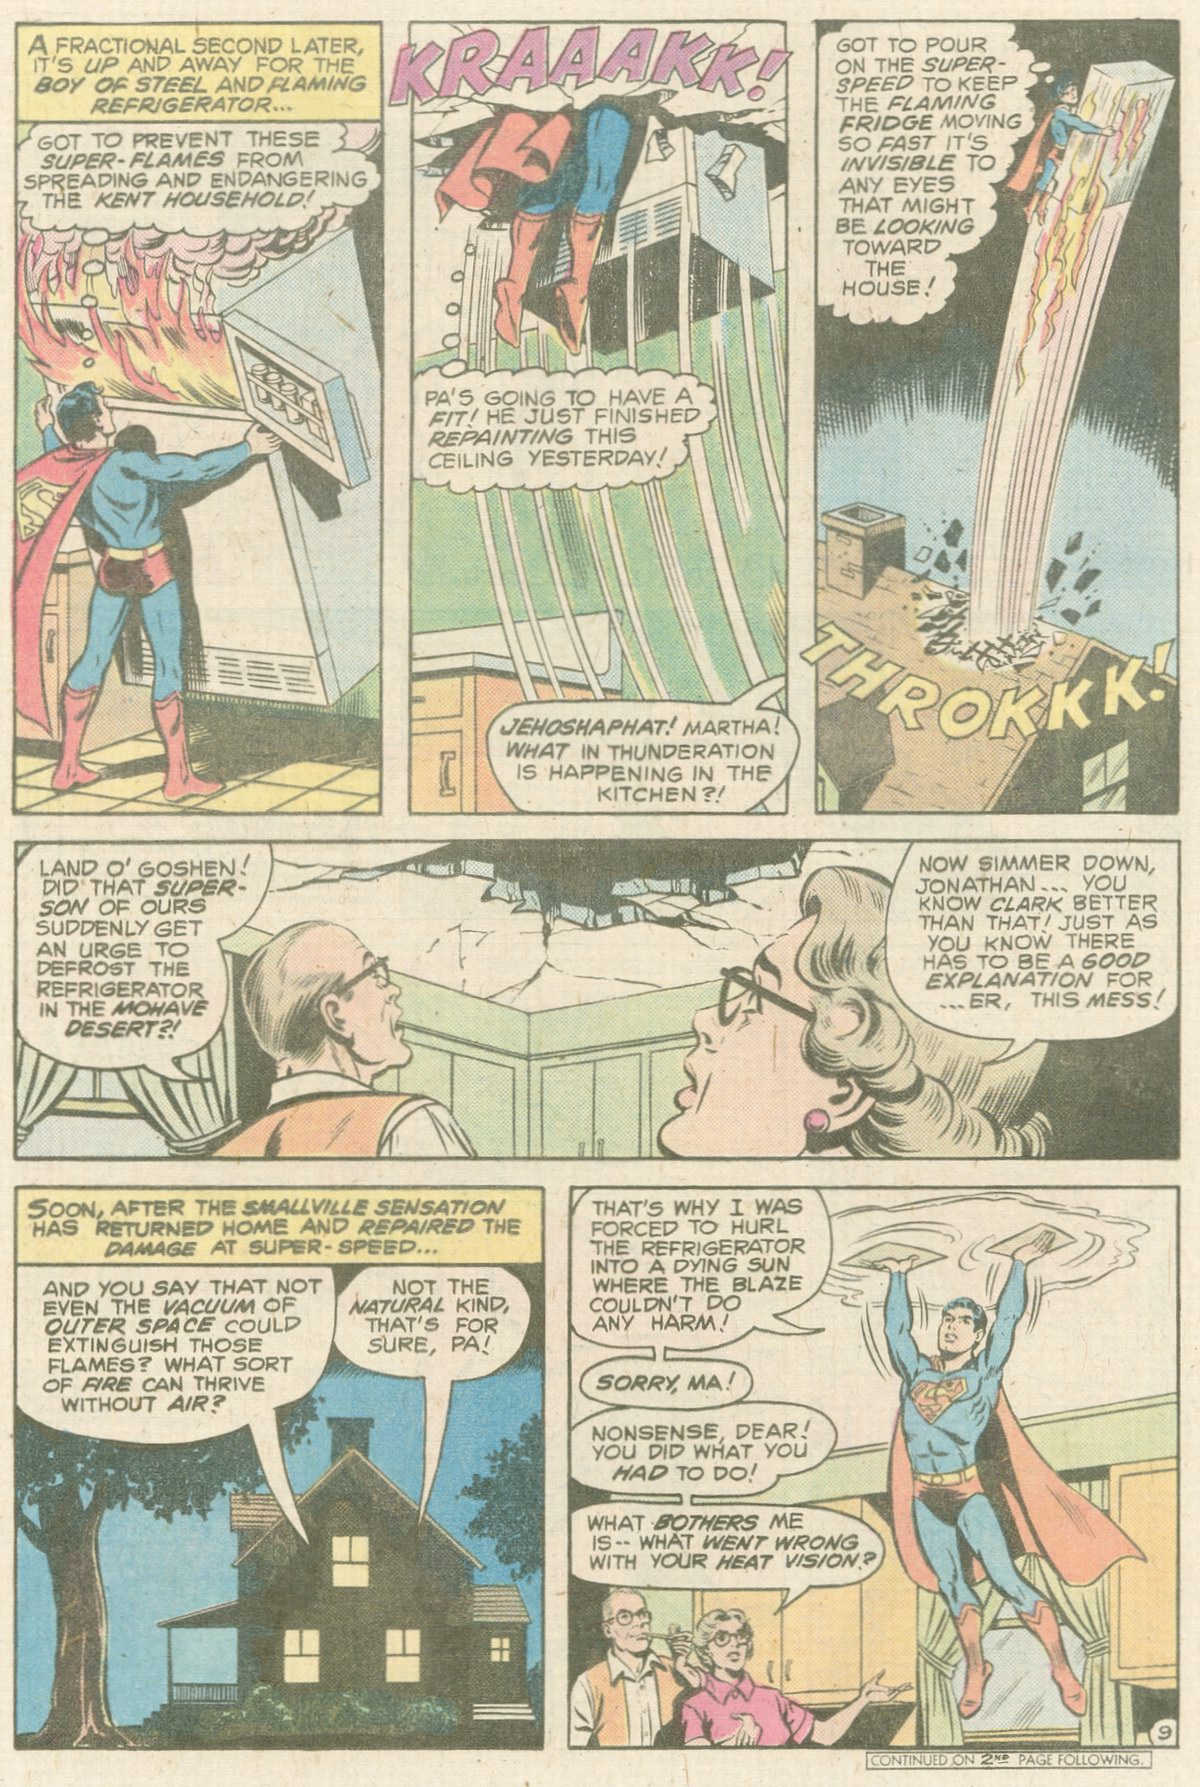 The New Adventures of Superboy 14 Page 9